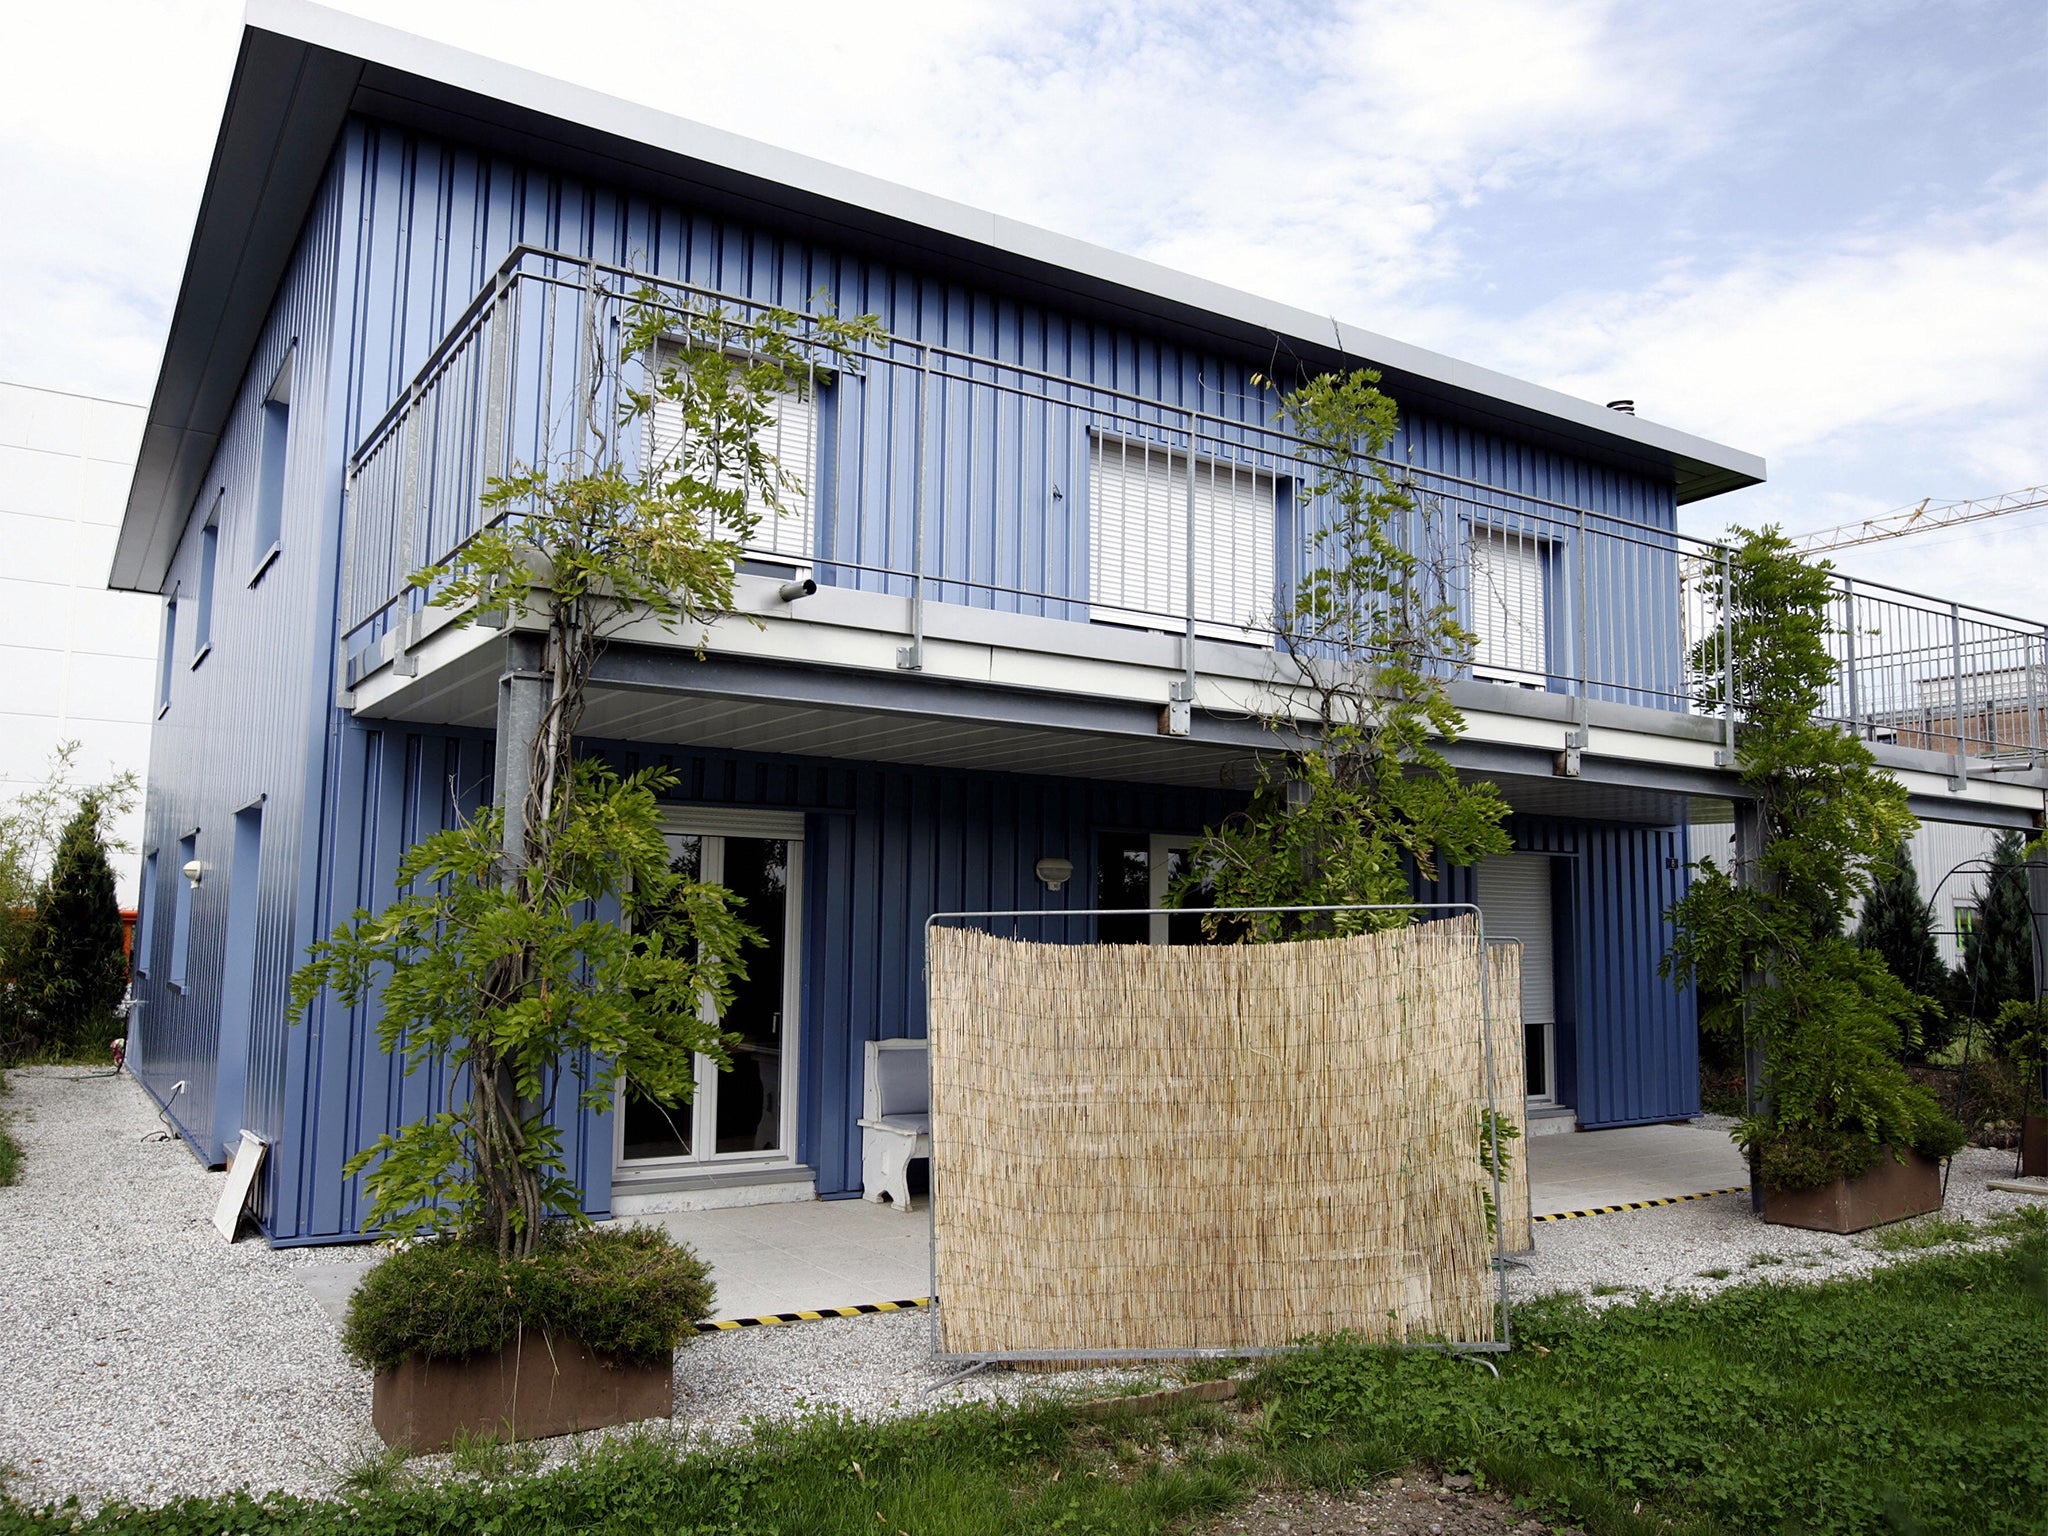 The assisted suicide clinic Dignitas, in Pfaeffikon near Zurich